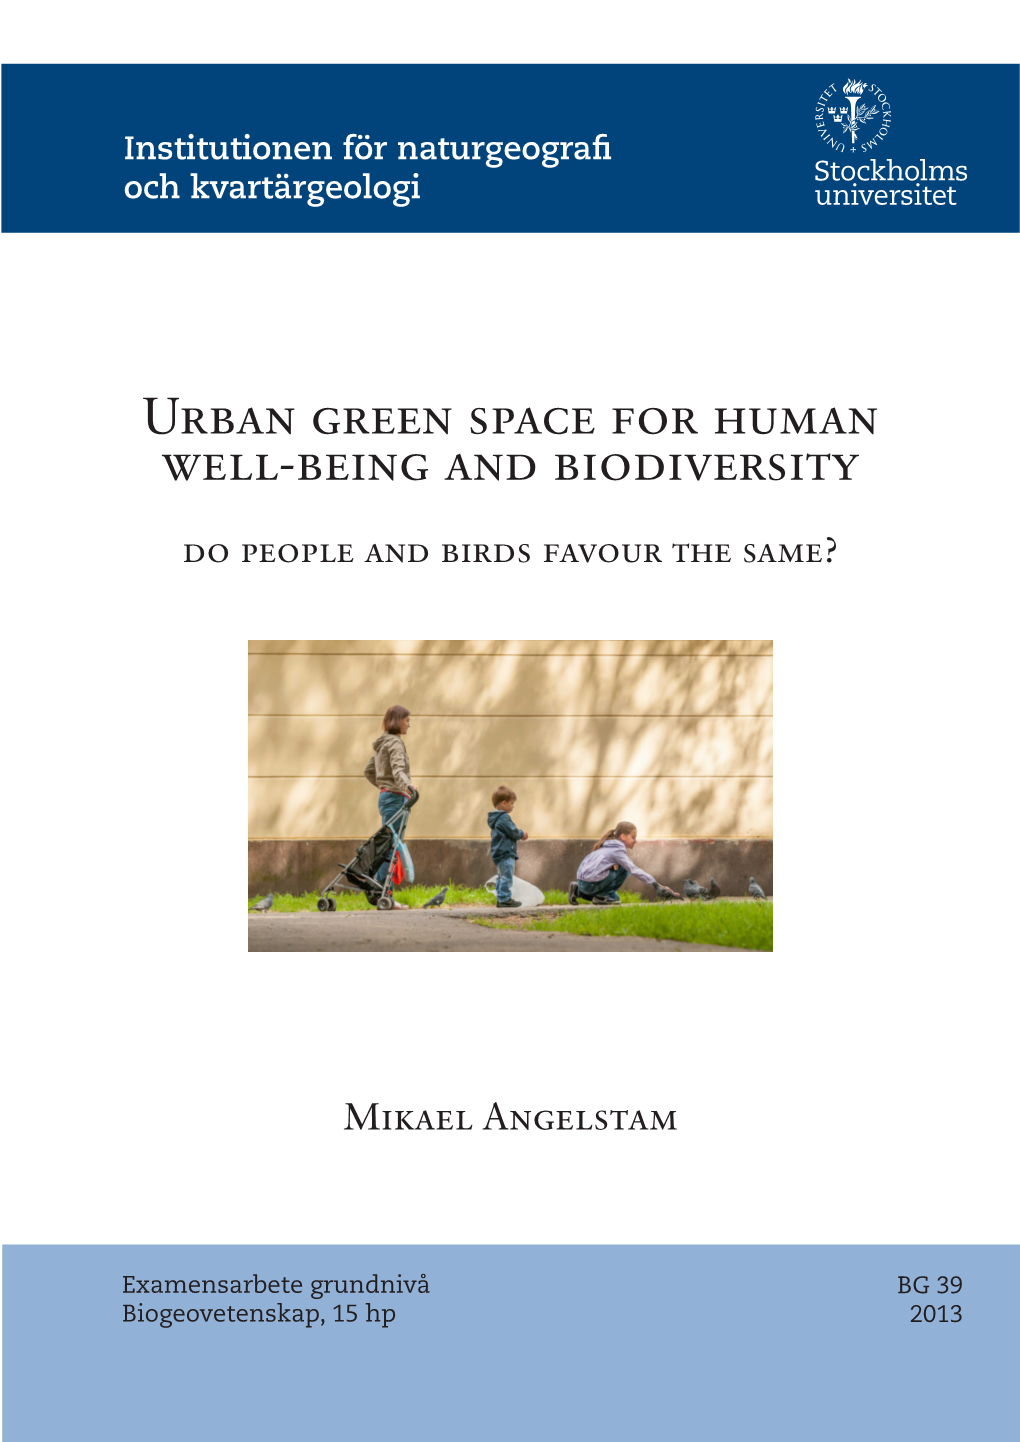 Urban Green Space for Human Well-Being and Biodiversity